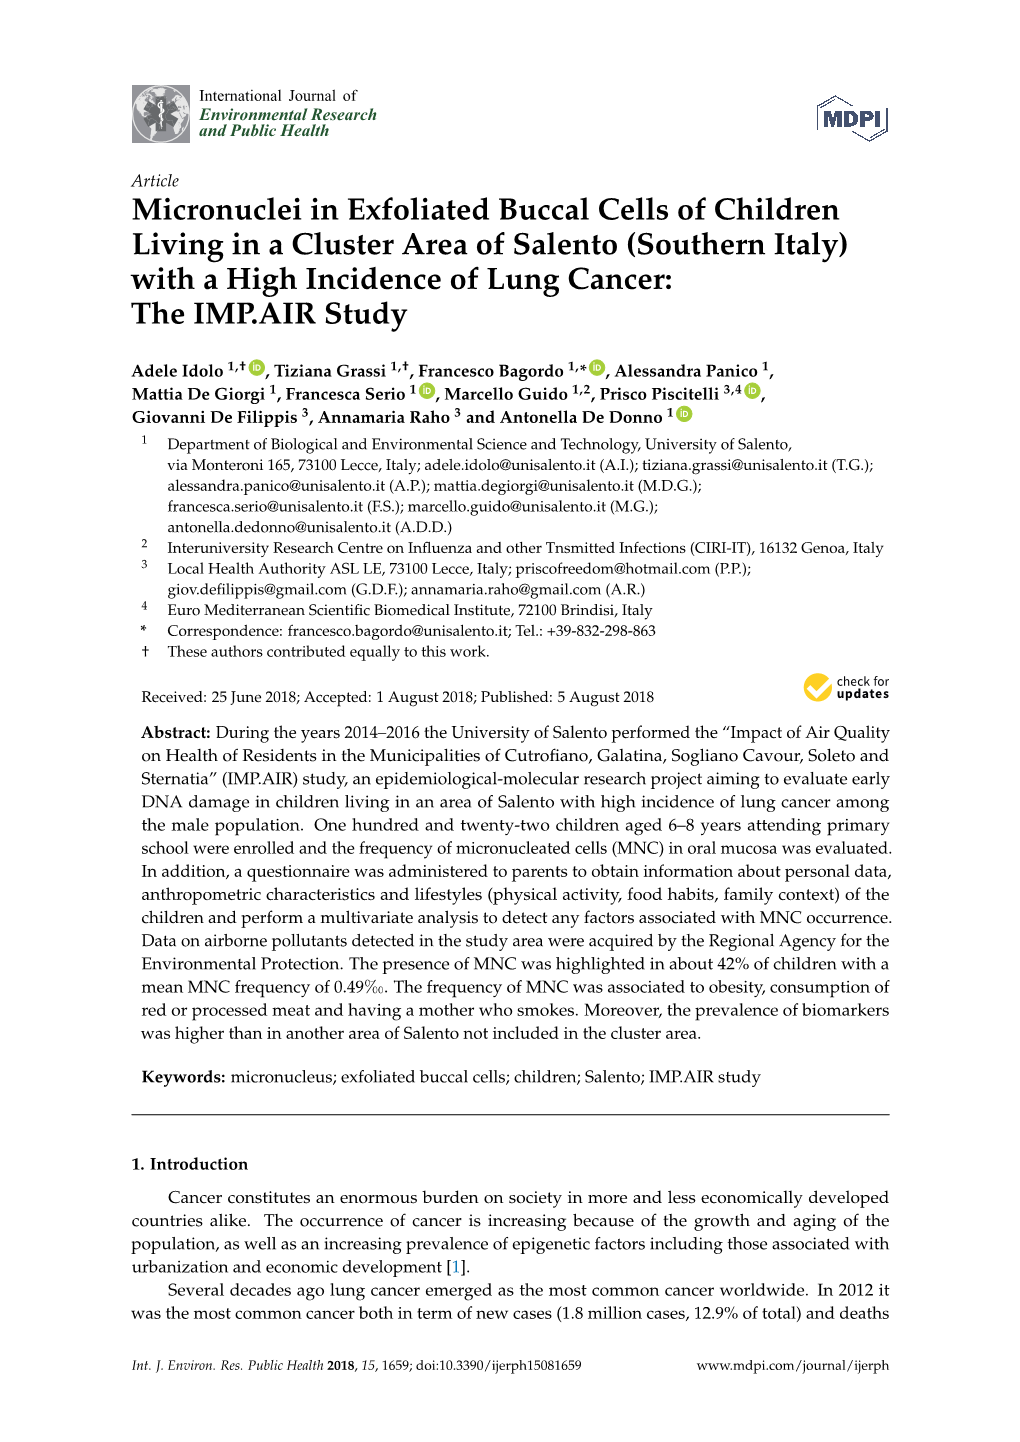 Micronuclei in Exfoliated Buccal Cells of Children Living in a Cluster Area of Salento (Southern Italy) with a High Incidence of Lung Cancer: the IMP.AIR Study